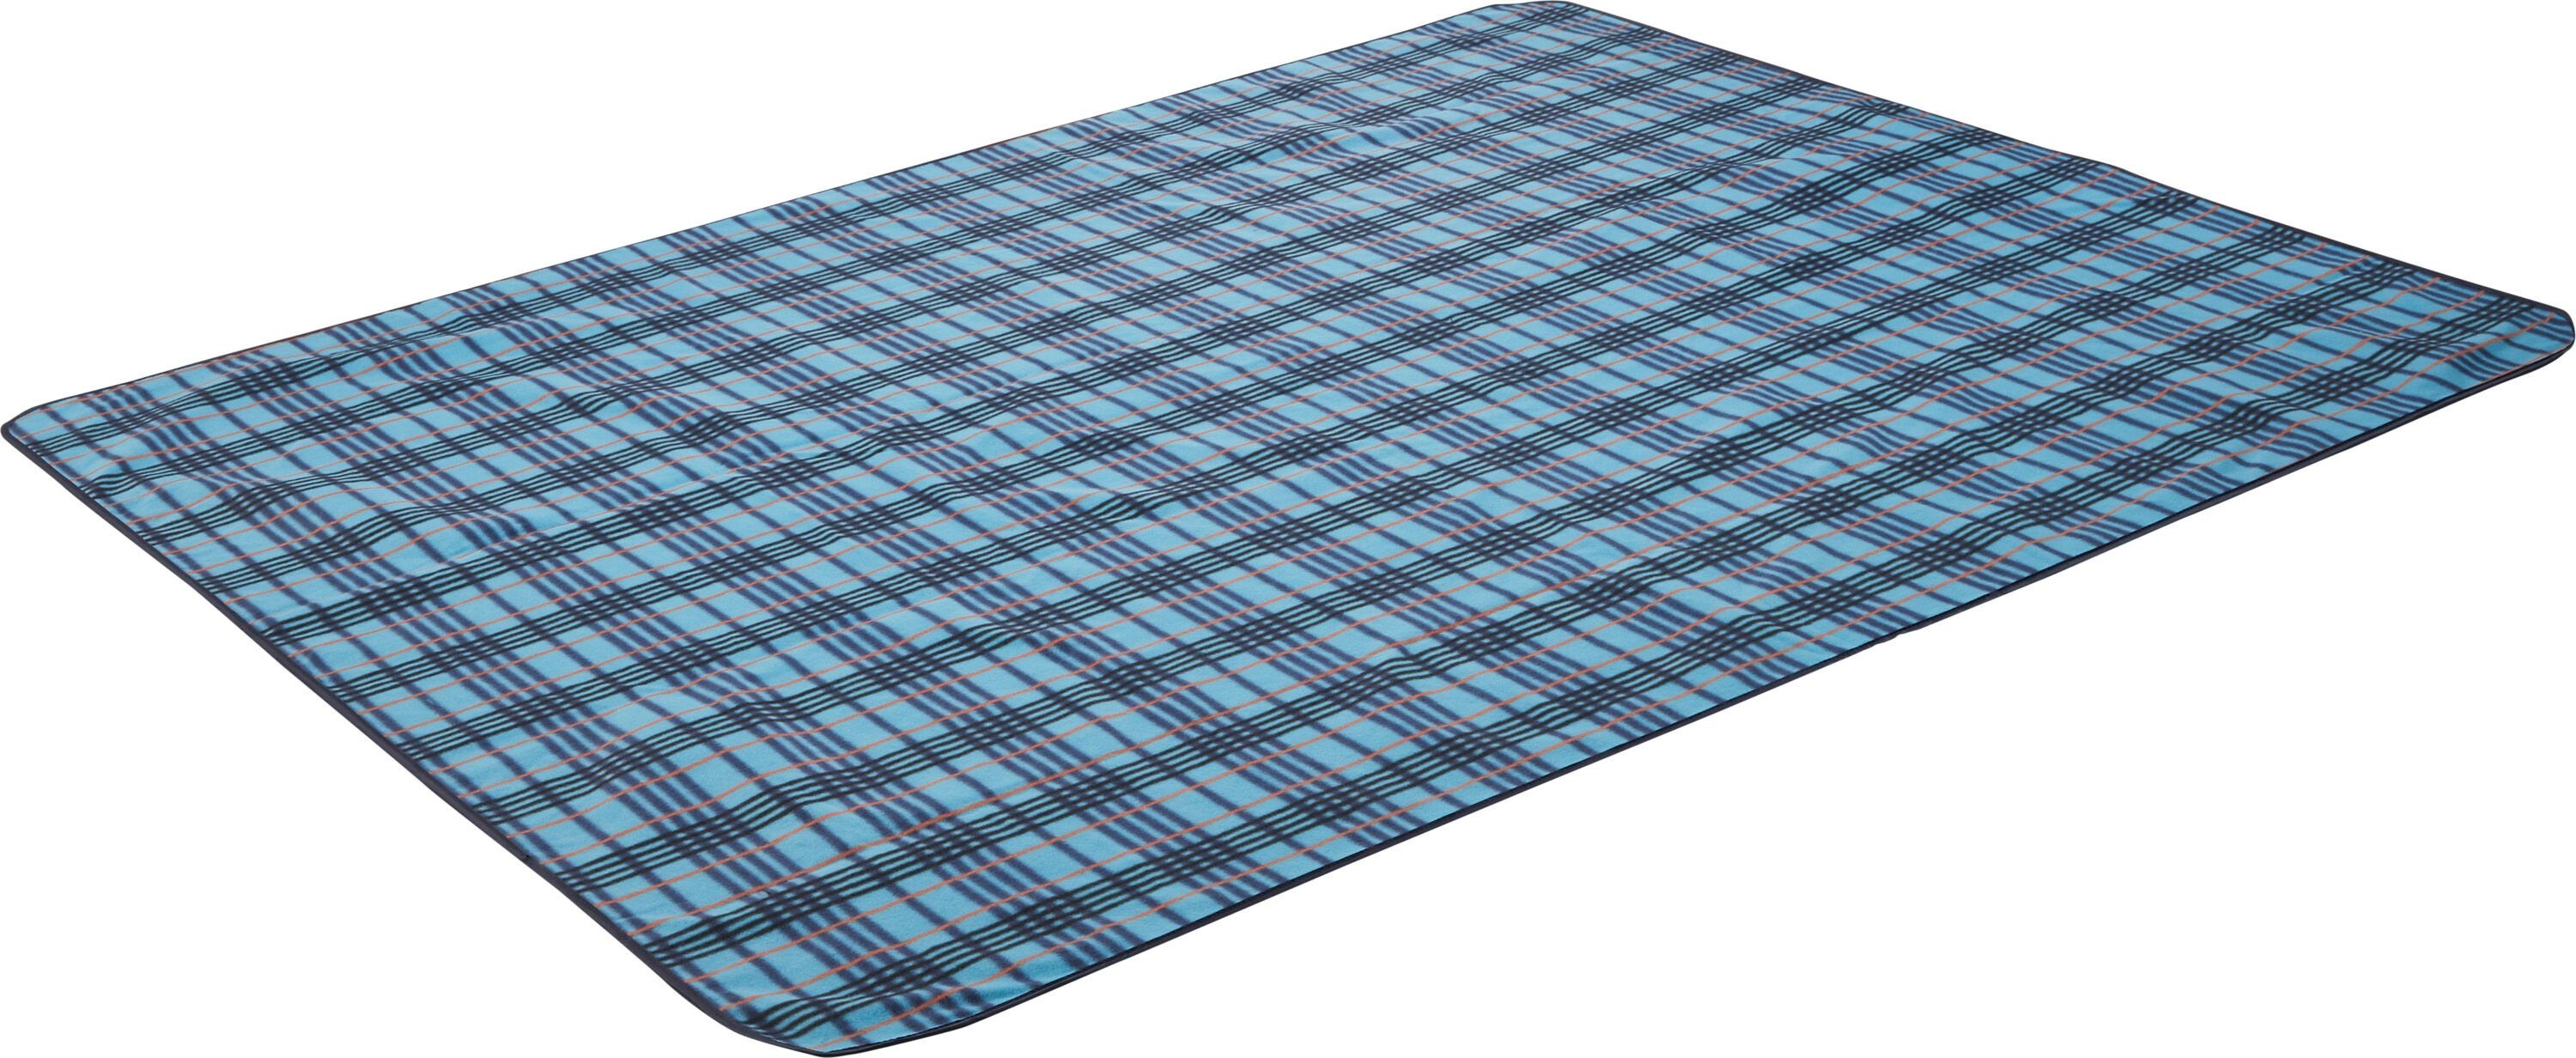 ANTHRACITE/TURQUOISE, STRIPED McKINLEY Camping-Decke Picknickdecke PICNIC RUG